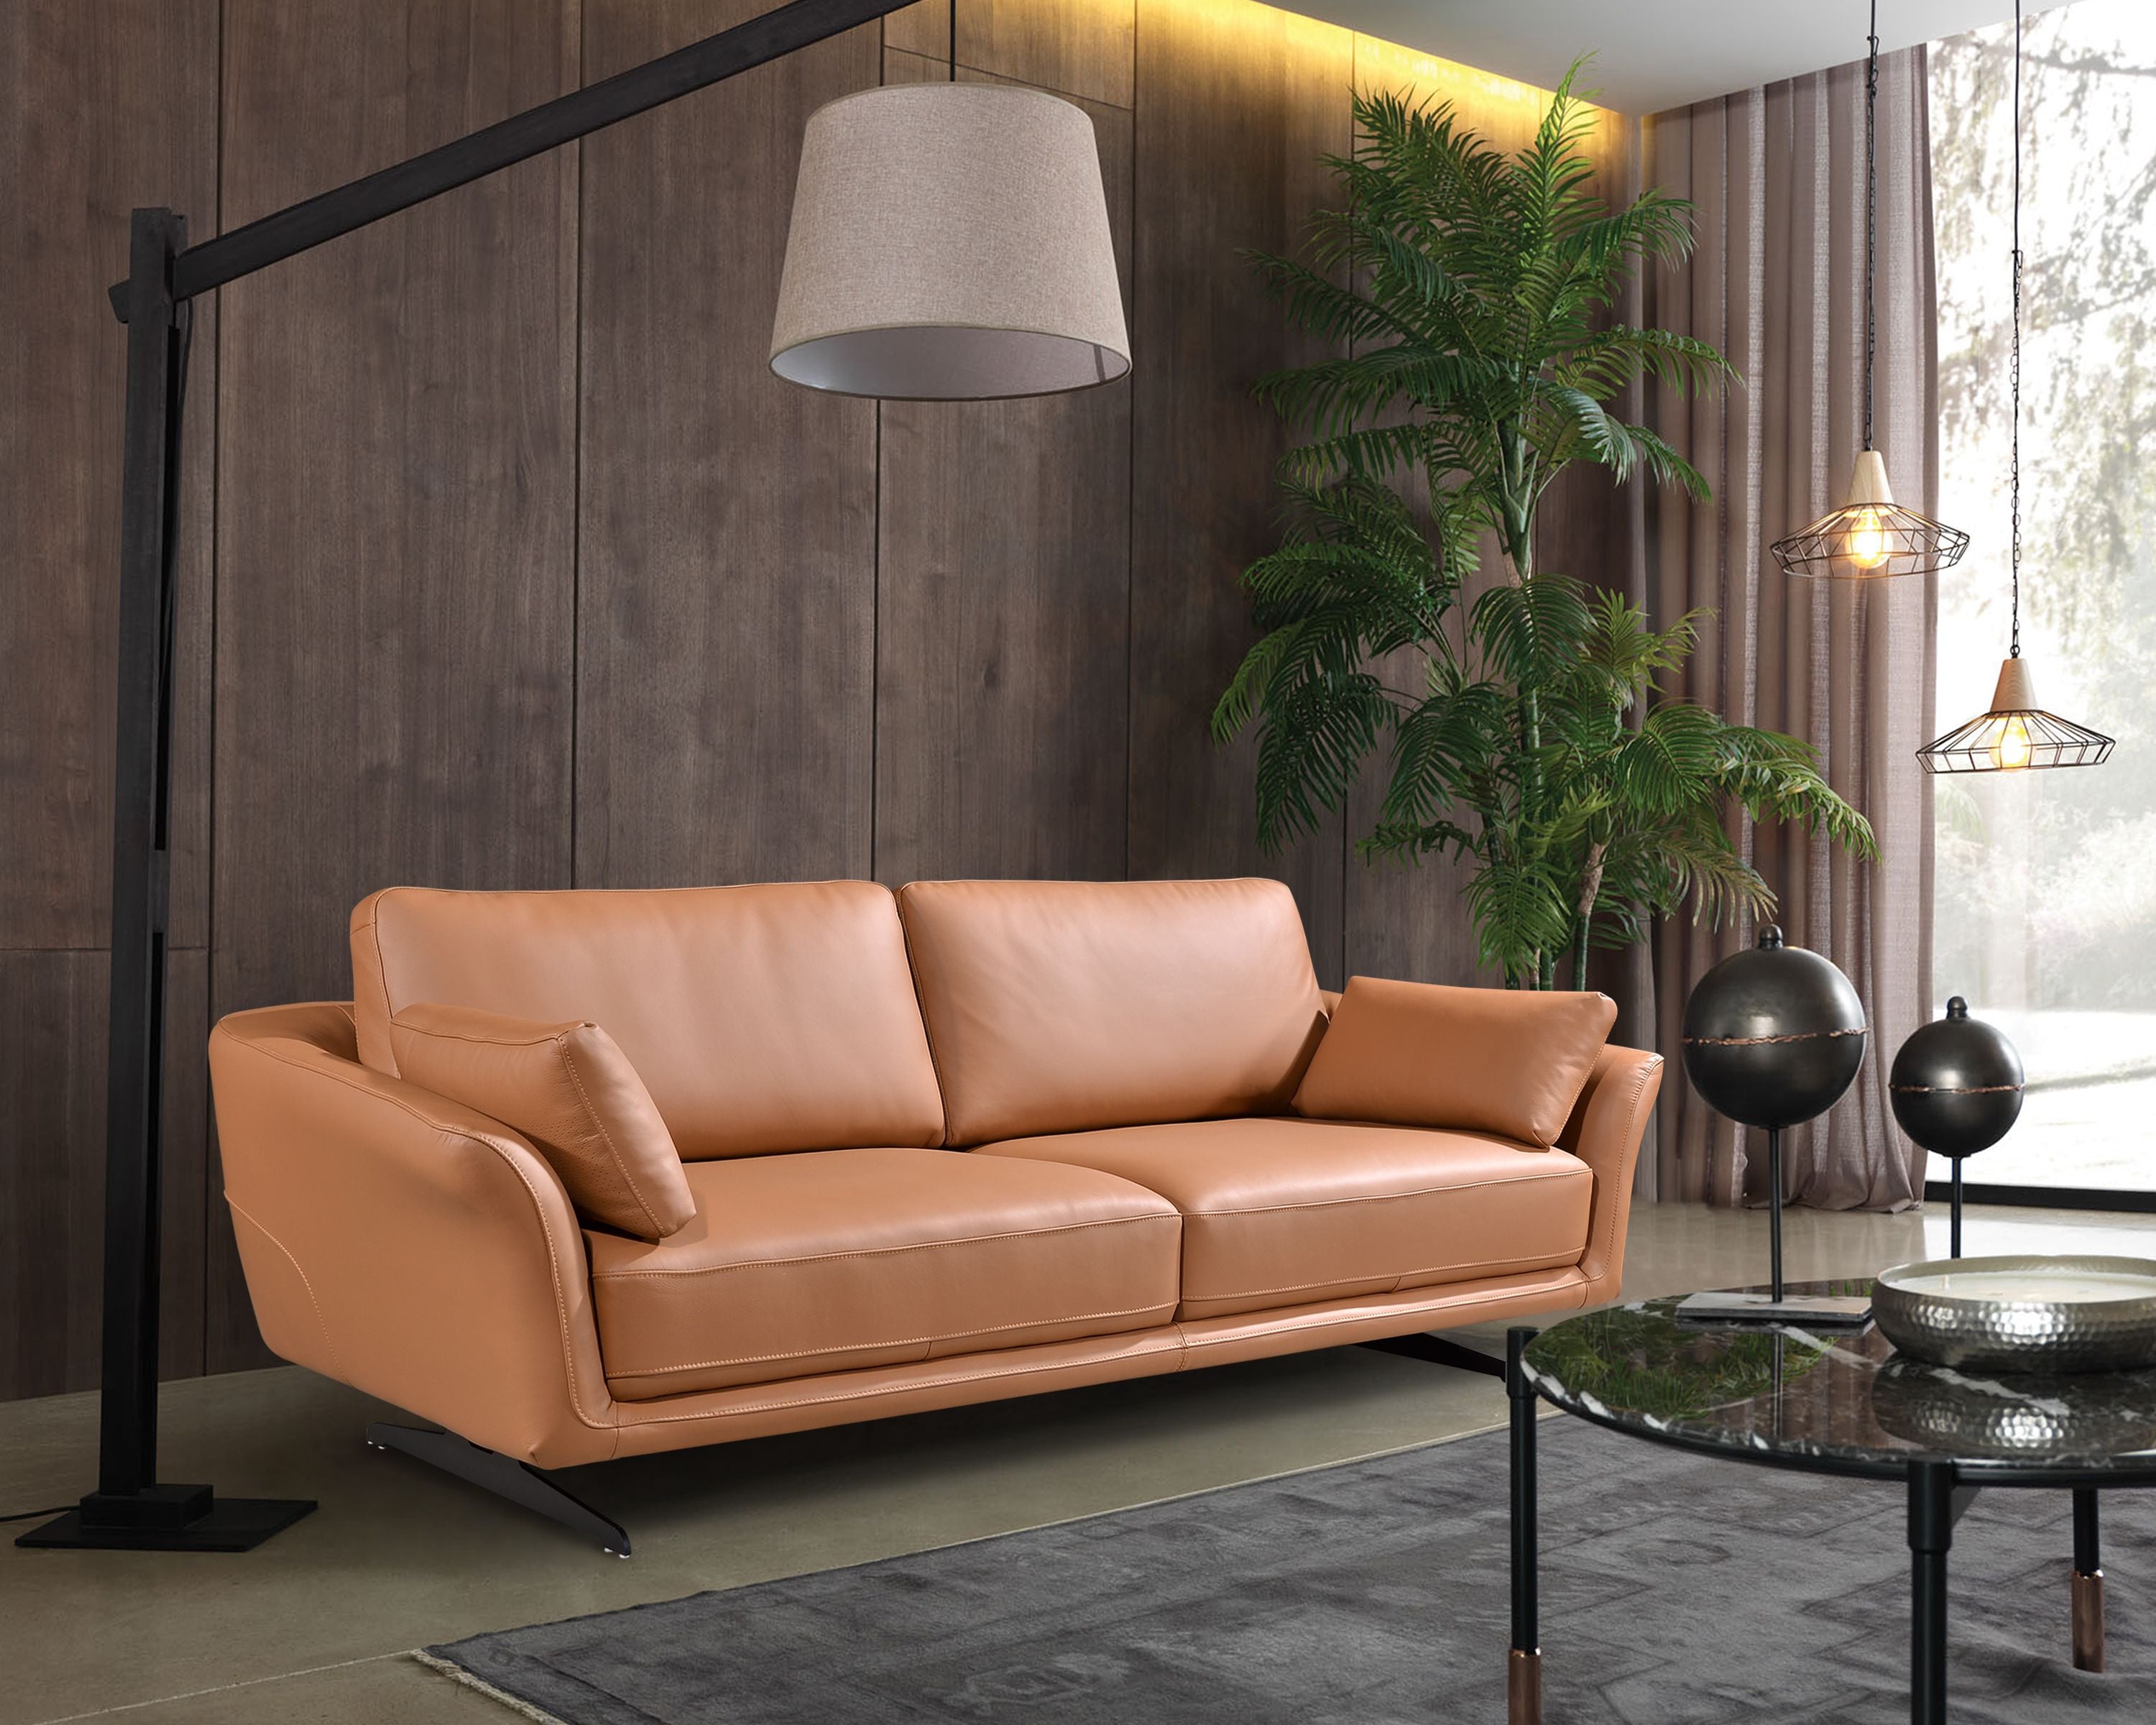 HELIOS 3 Seater Sofa in Leather by Castilla